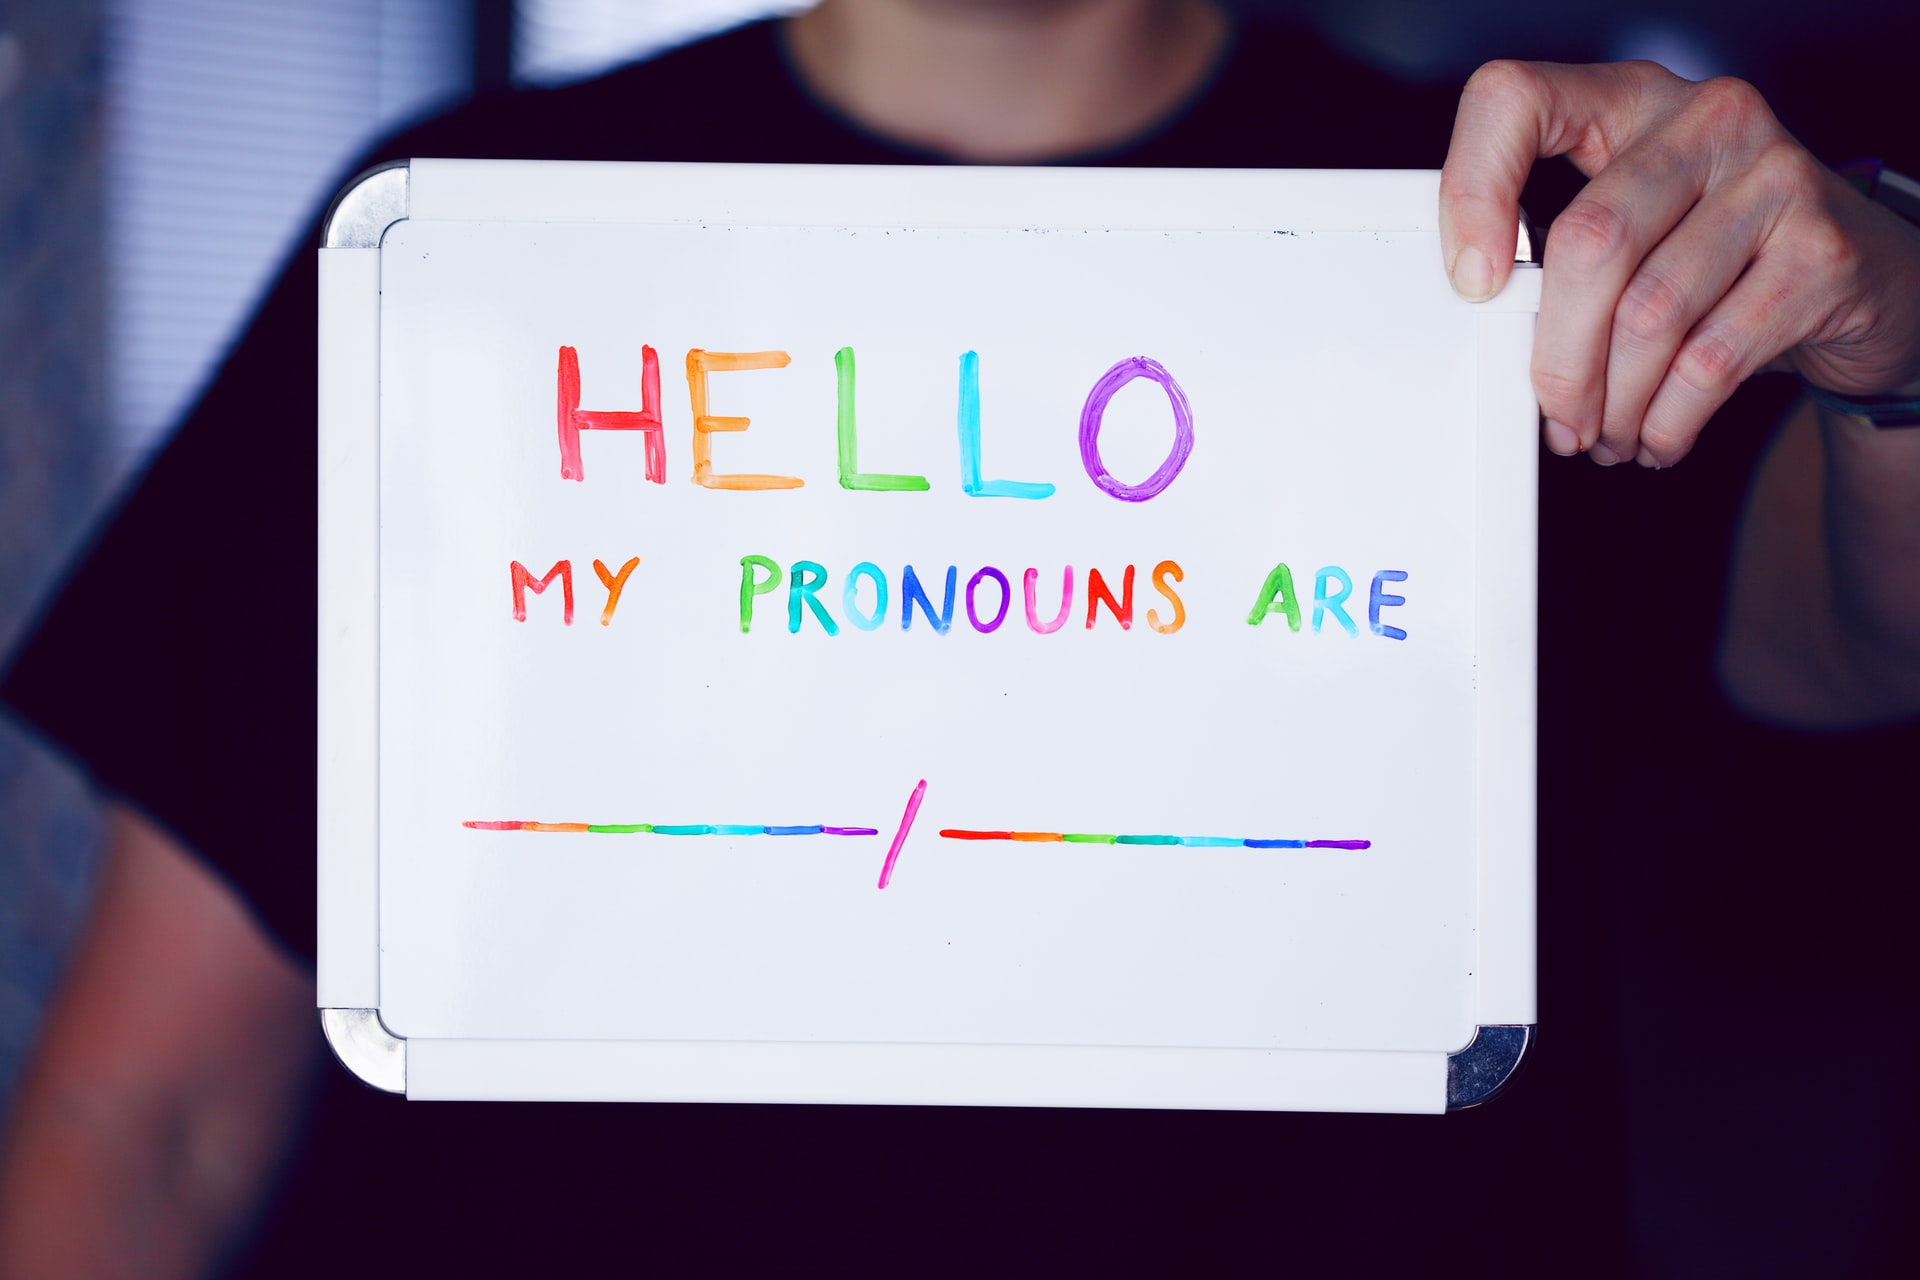 a person holding up a whiteboard advocating for lgbt pronouns